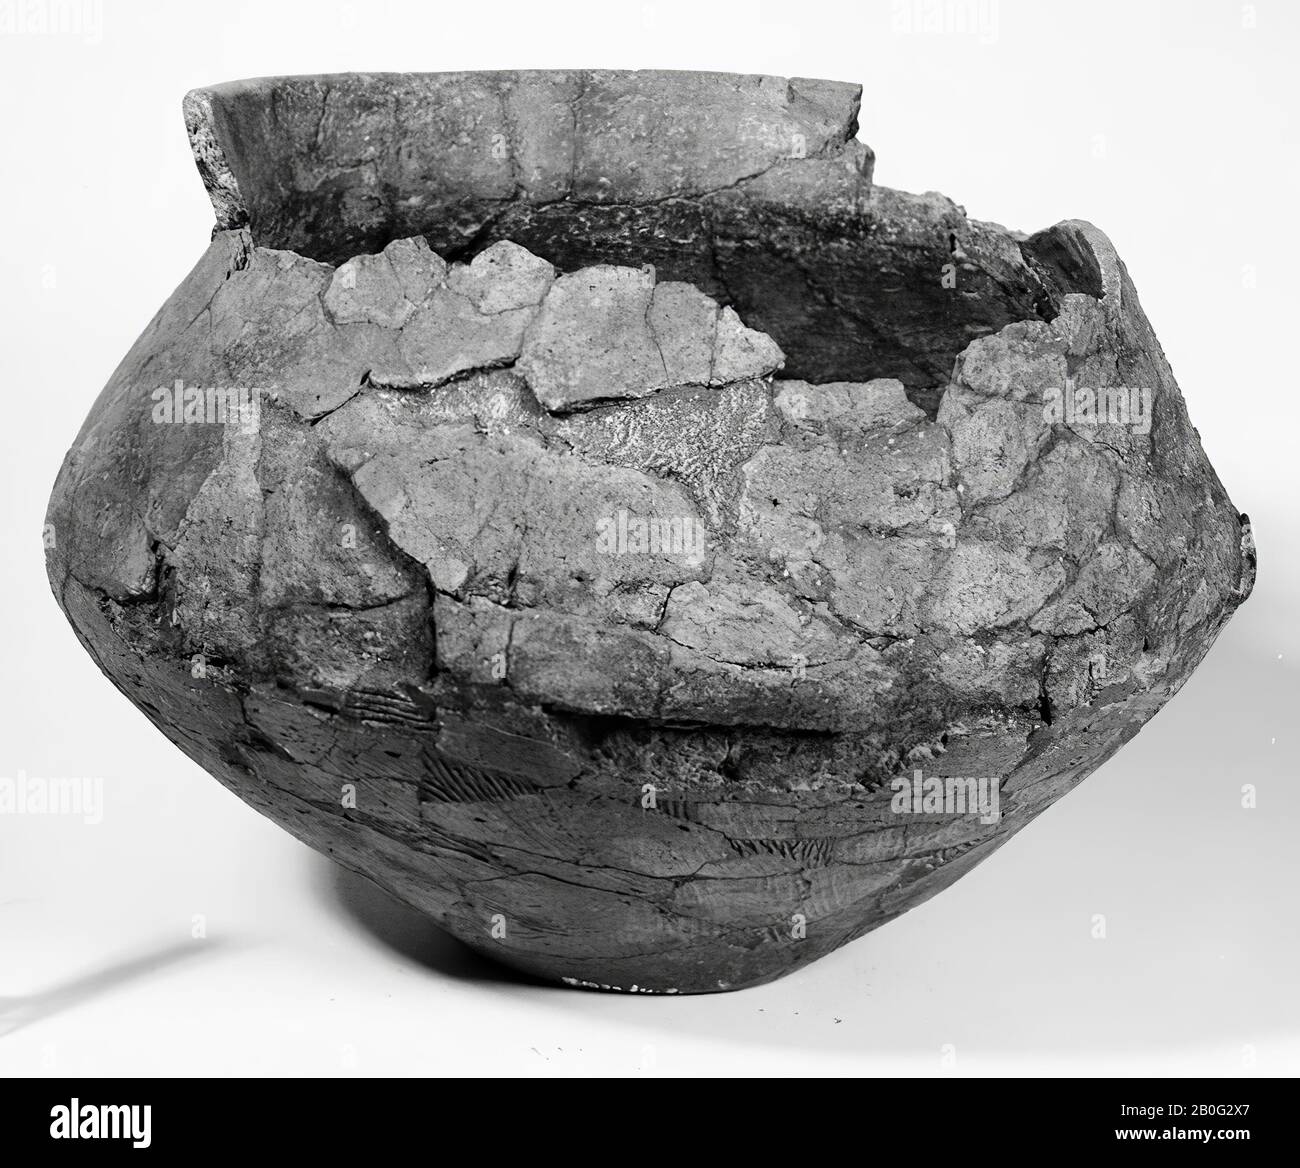 Hallstatturn of earthenware, the edge is largely missing. Old bondings and additions. Contains cremated residues, urn, earthenware, h: 21 cm, diam: 28.5 cm, prehistory -800 Stock Photo